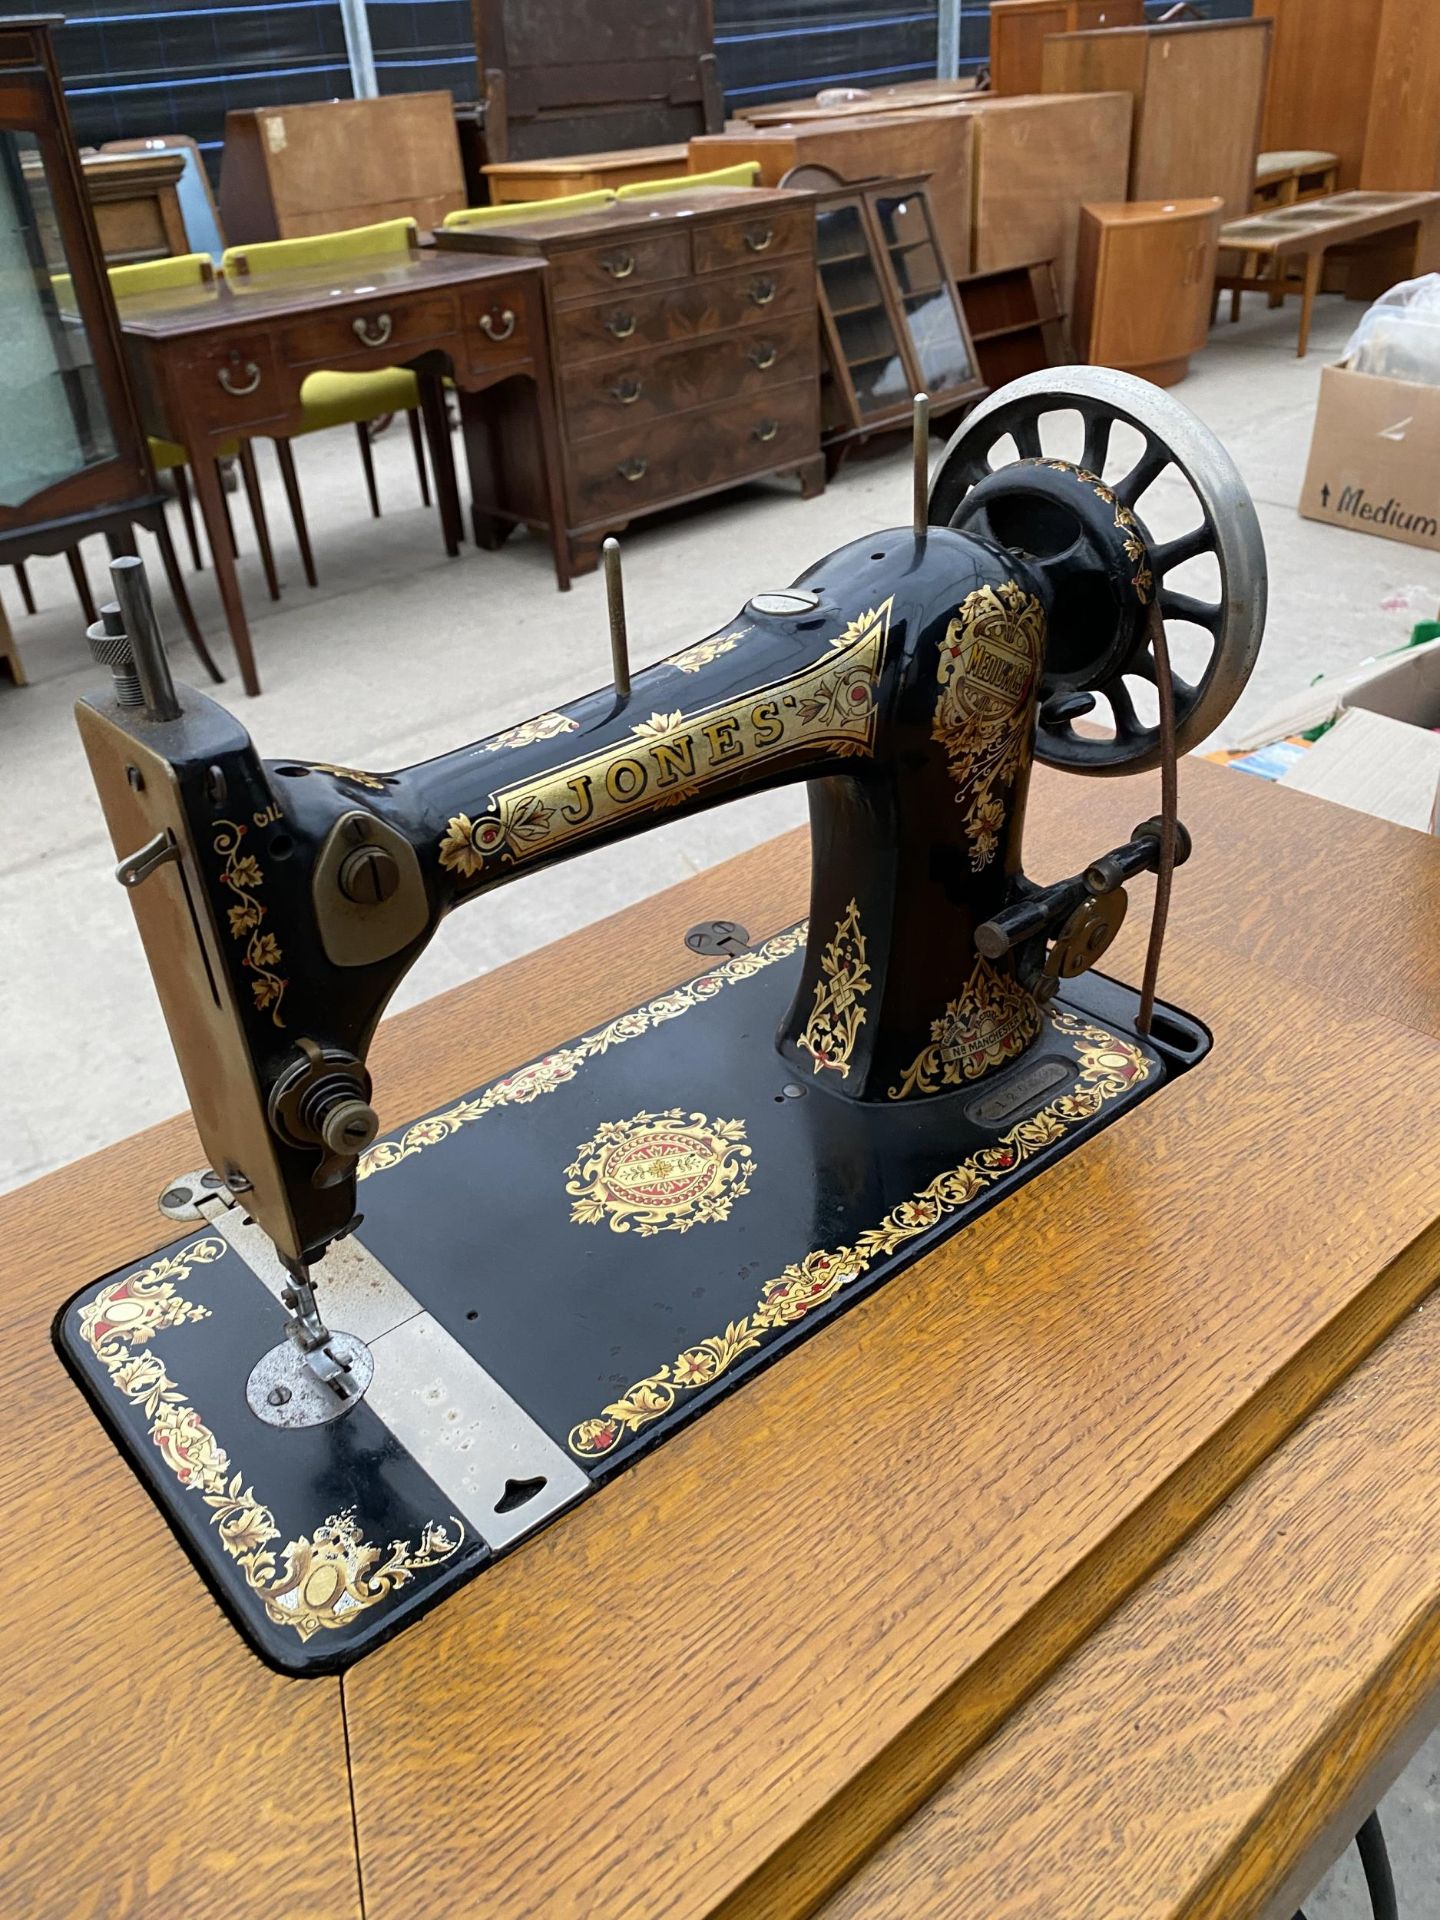 A JONES TREADLE SEWING MACHINE WITH CAST IRON BASE - Image 2 of 3